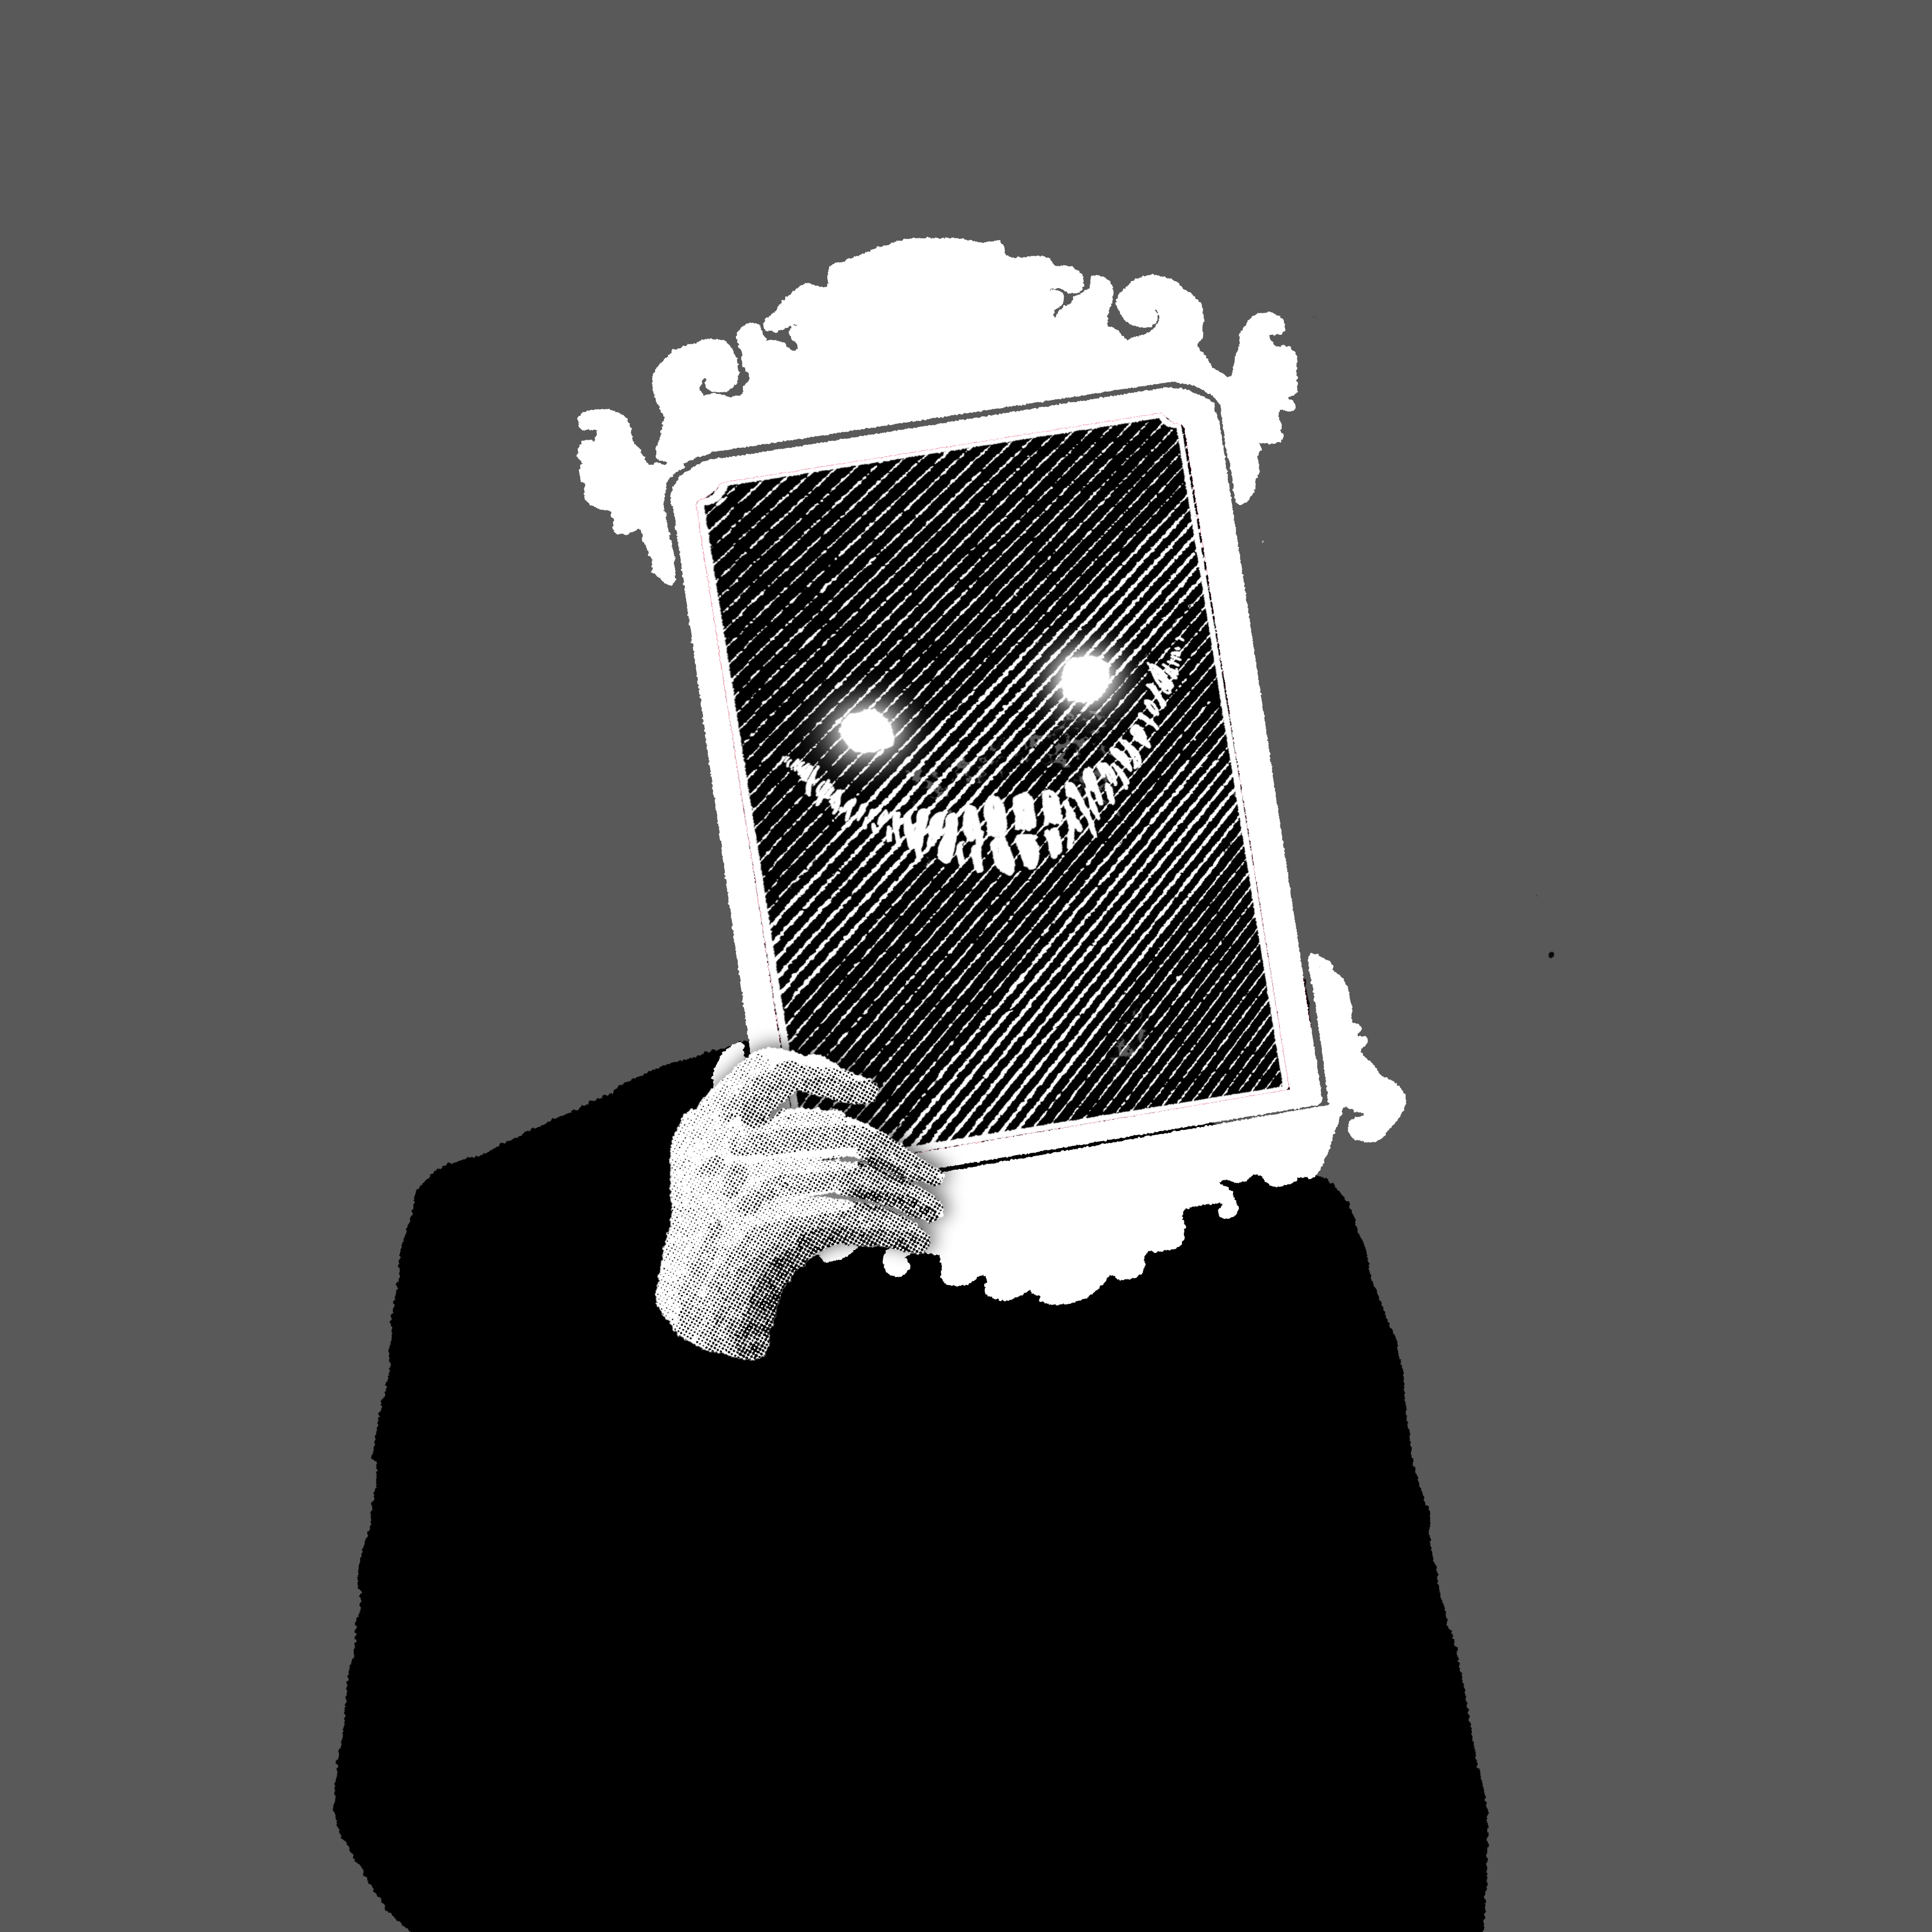 An animated image of a person holding up a mirror in which is reflected glowing eyes and a sharp toothed grin